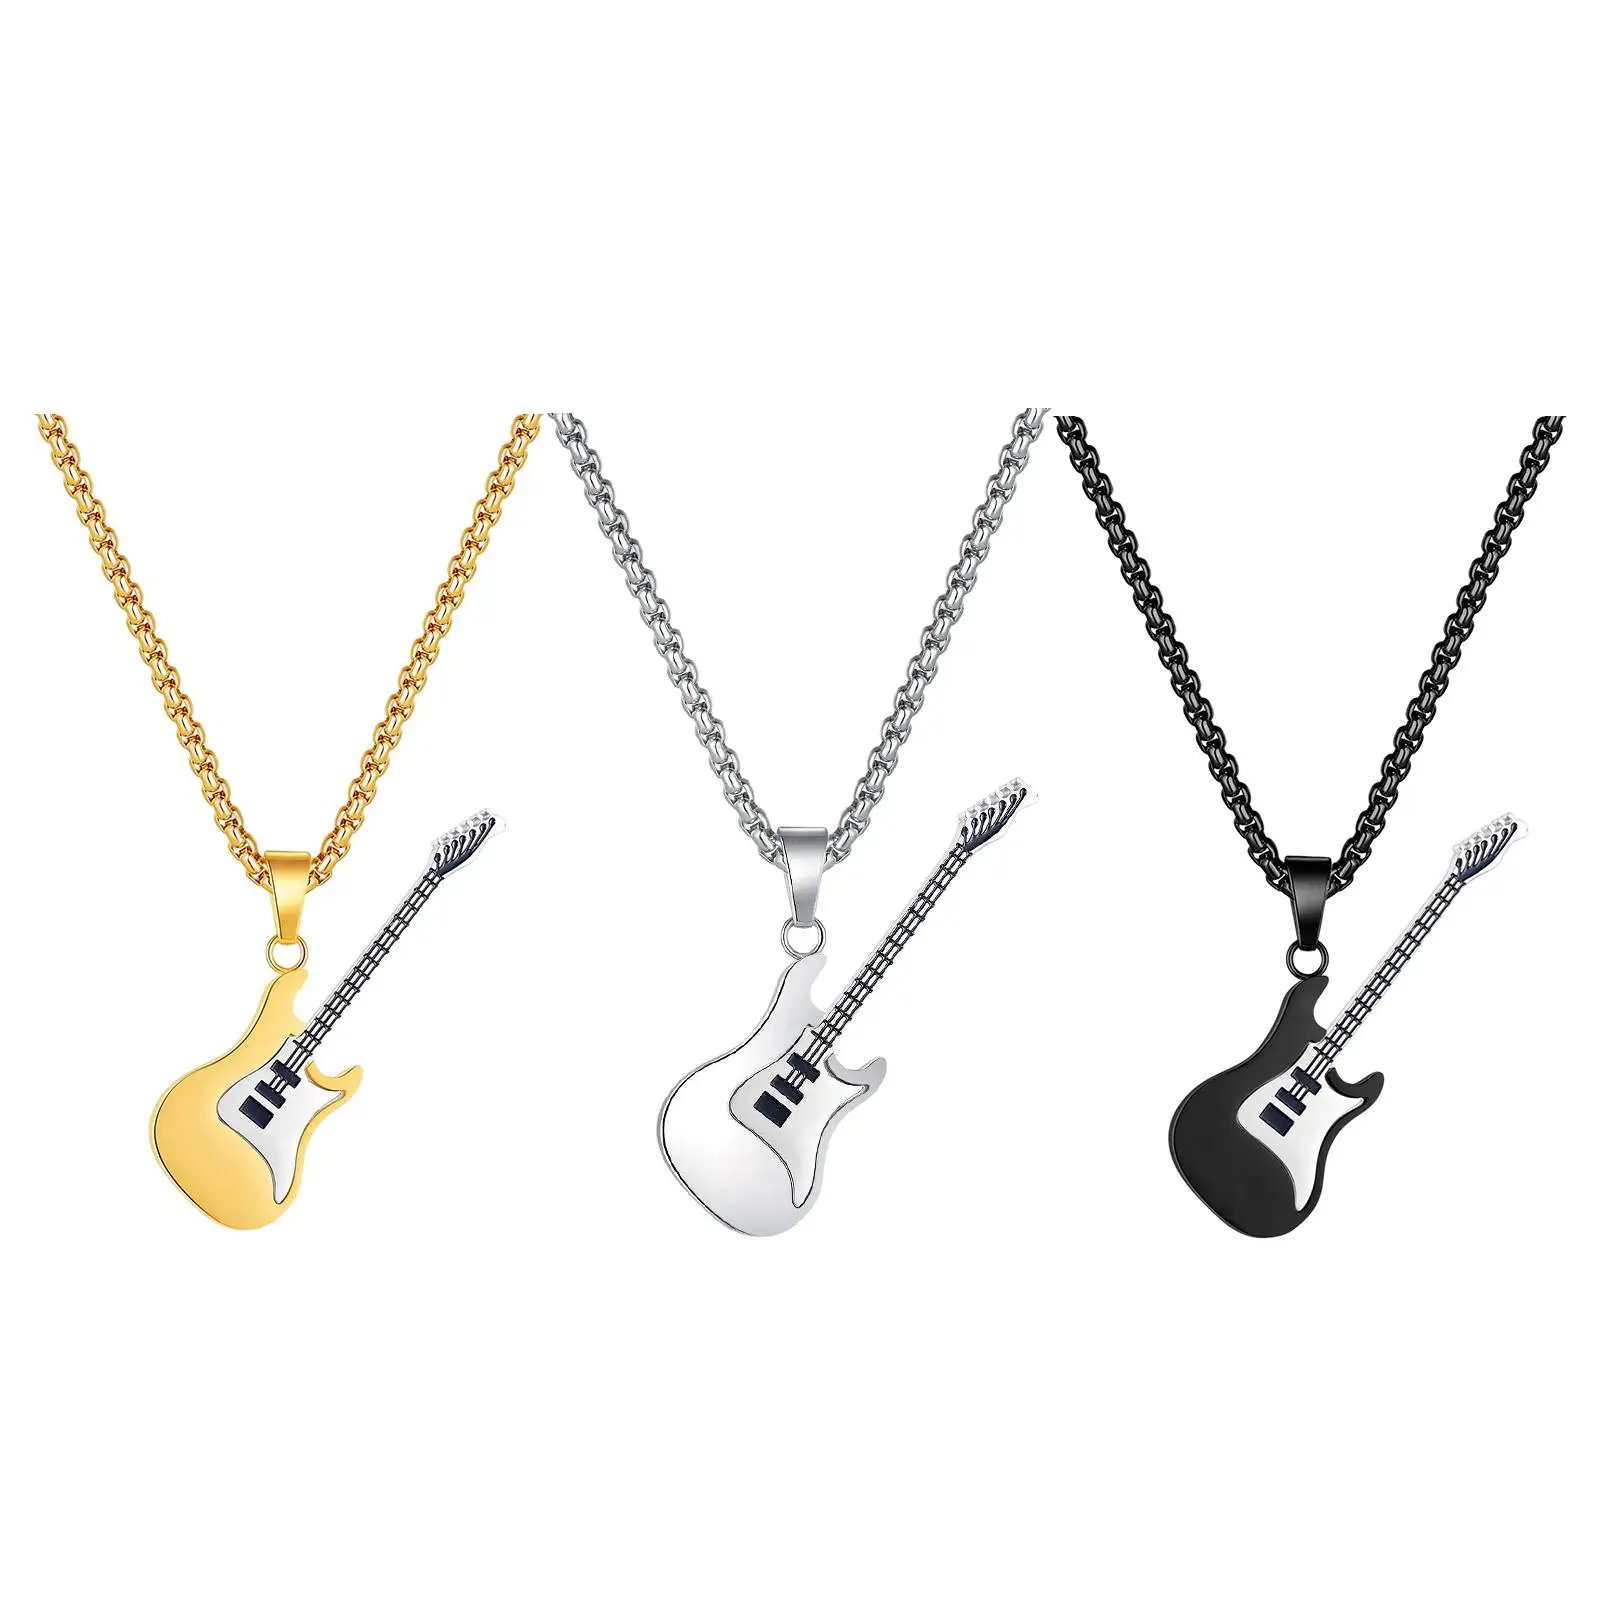 Musical Guitar Pendant Necklace Pendant Length 50mm Street Fashion Meaningful Gift for Guitarist, Bassist